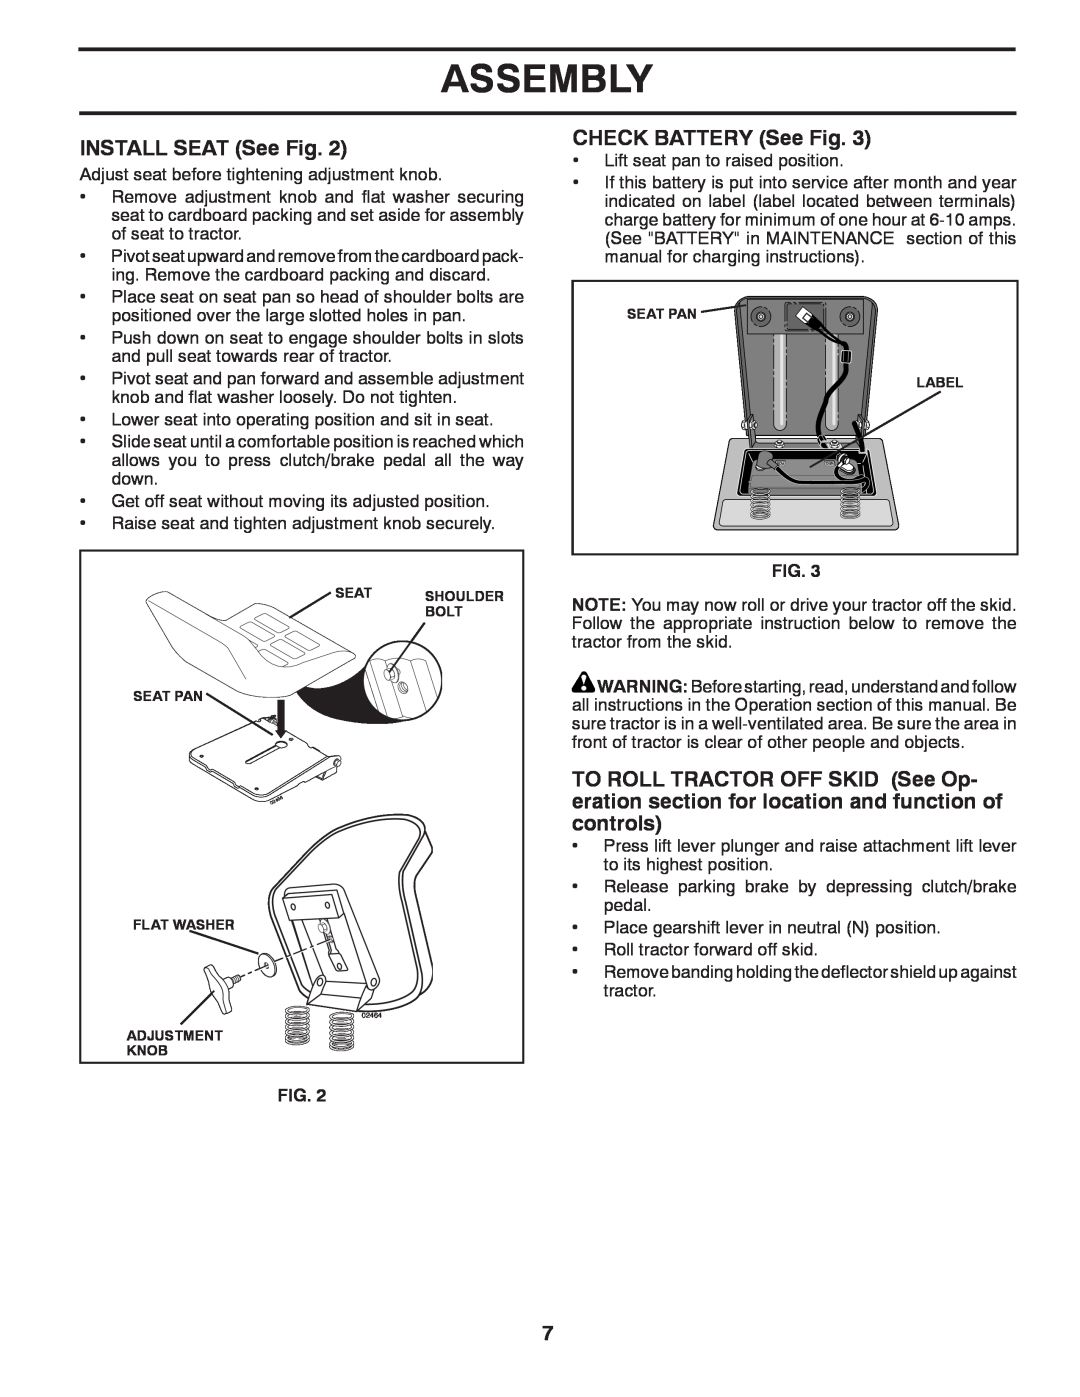 Poulan 418757, 96012008400 manual INSTALL SEAT See Fig, CHECK BATTERY See Fig, Assembly 